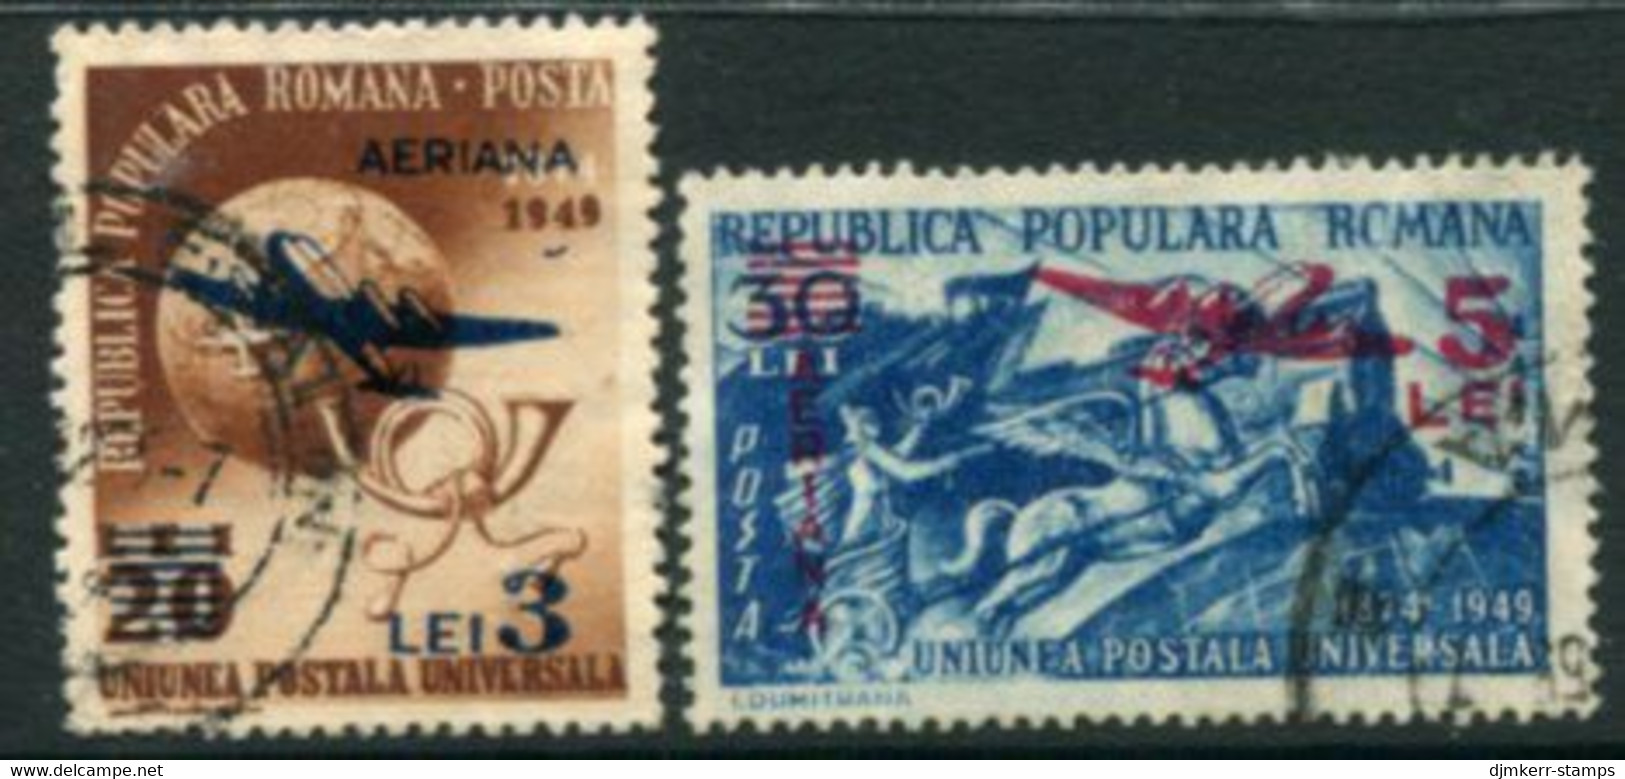 ROMANIA 1952 Currency Reform Surcharge On UPU. Airmail Used.  Michel 1365-66 - Gebruikt